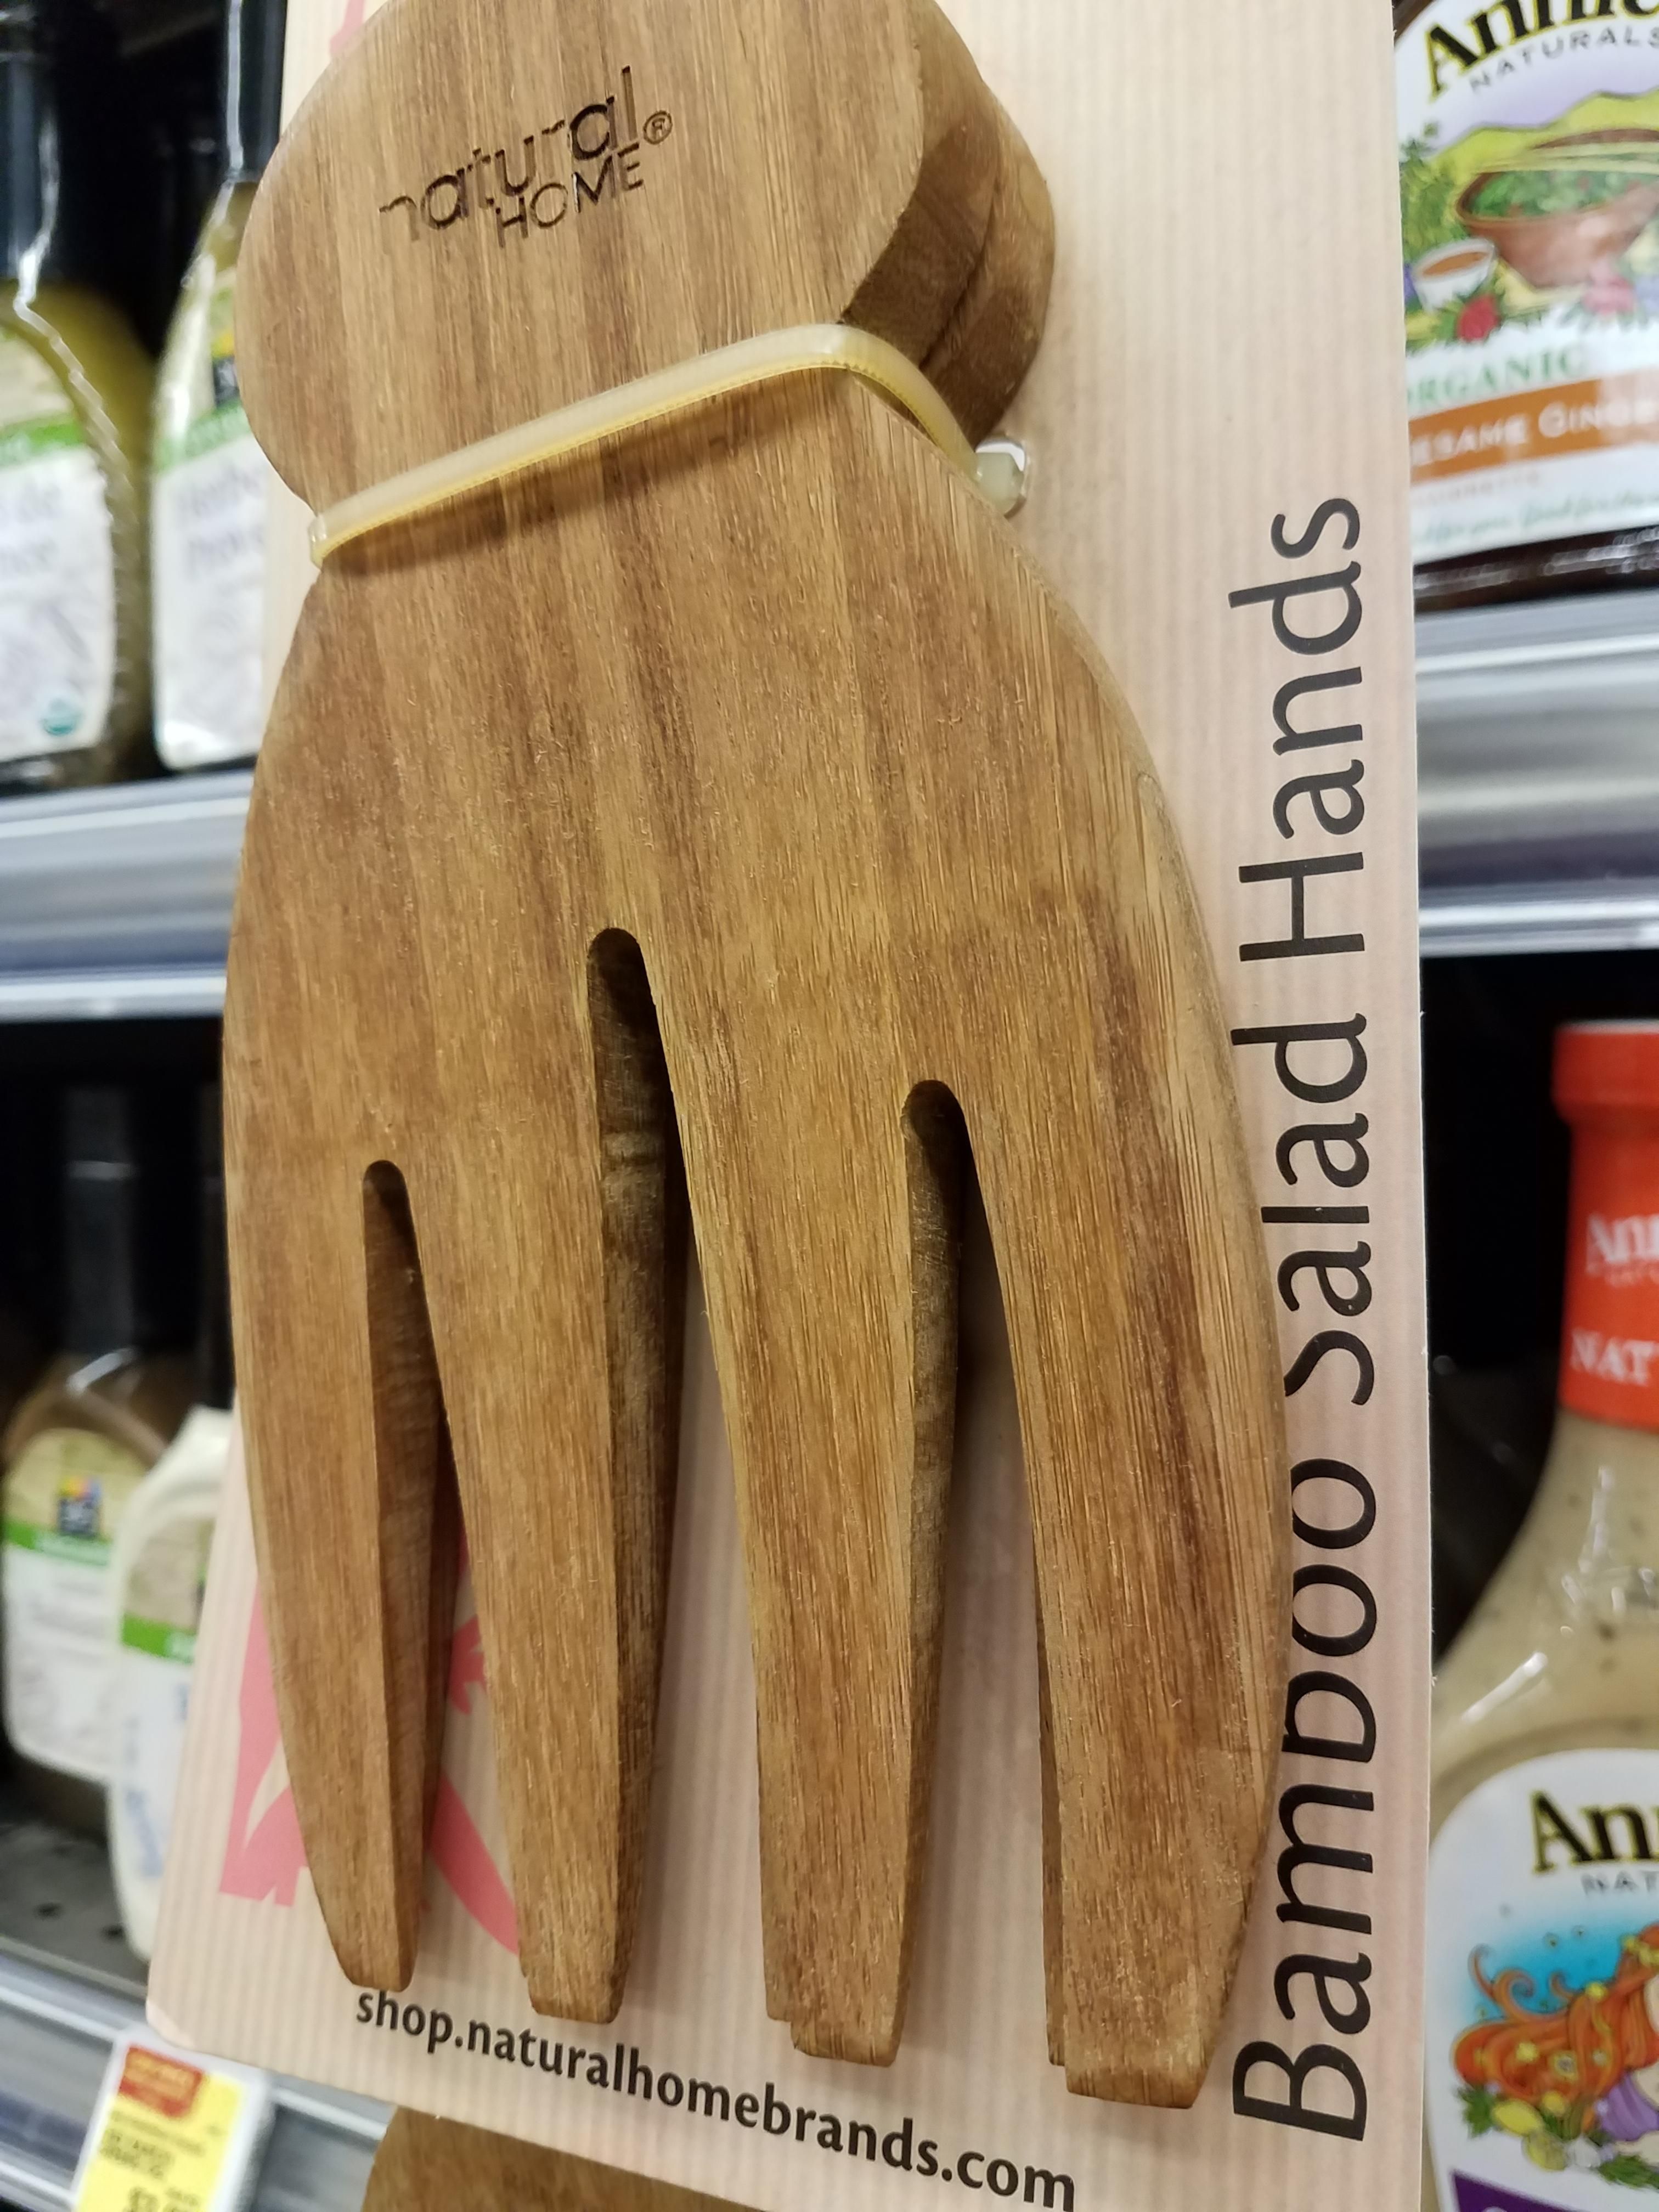 Most people had never heard of Edward scissorhands lesser known cousin, bamboo saladhands